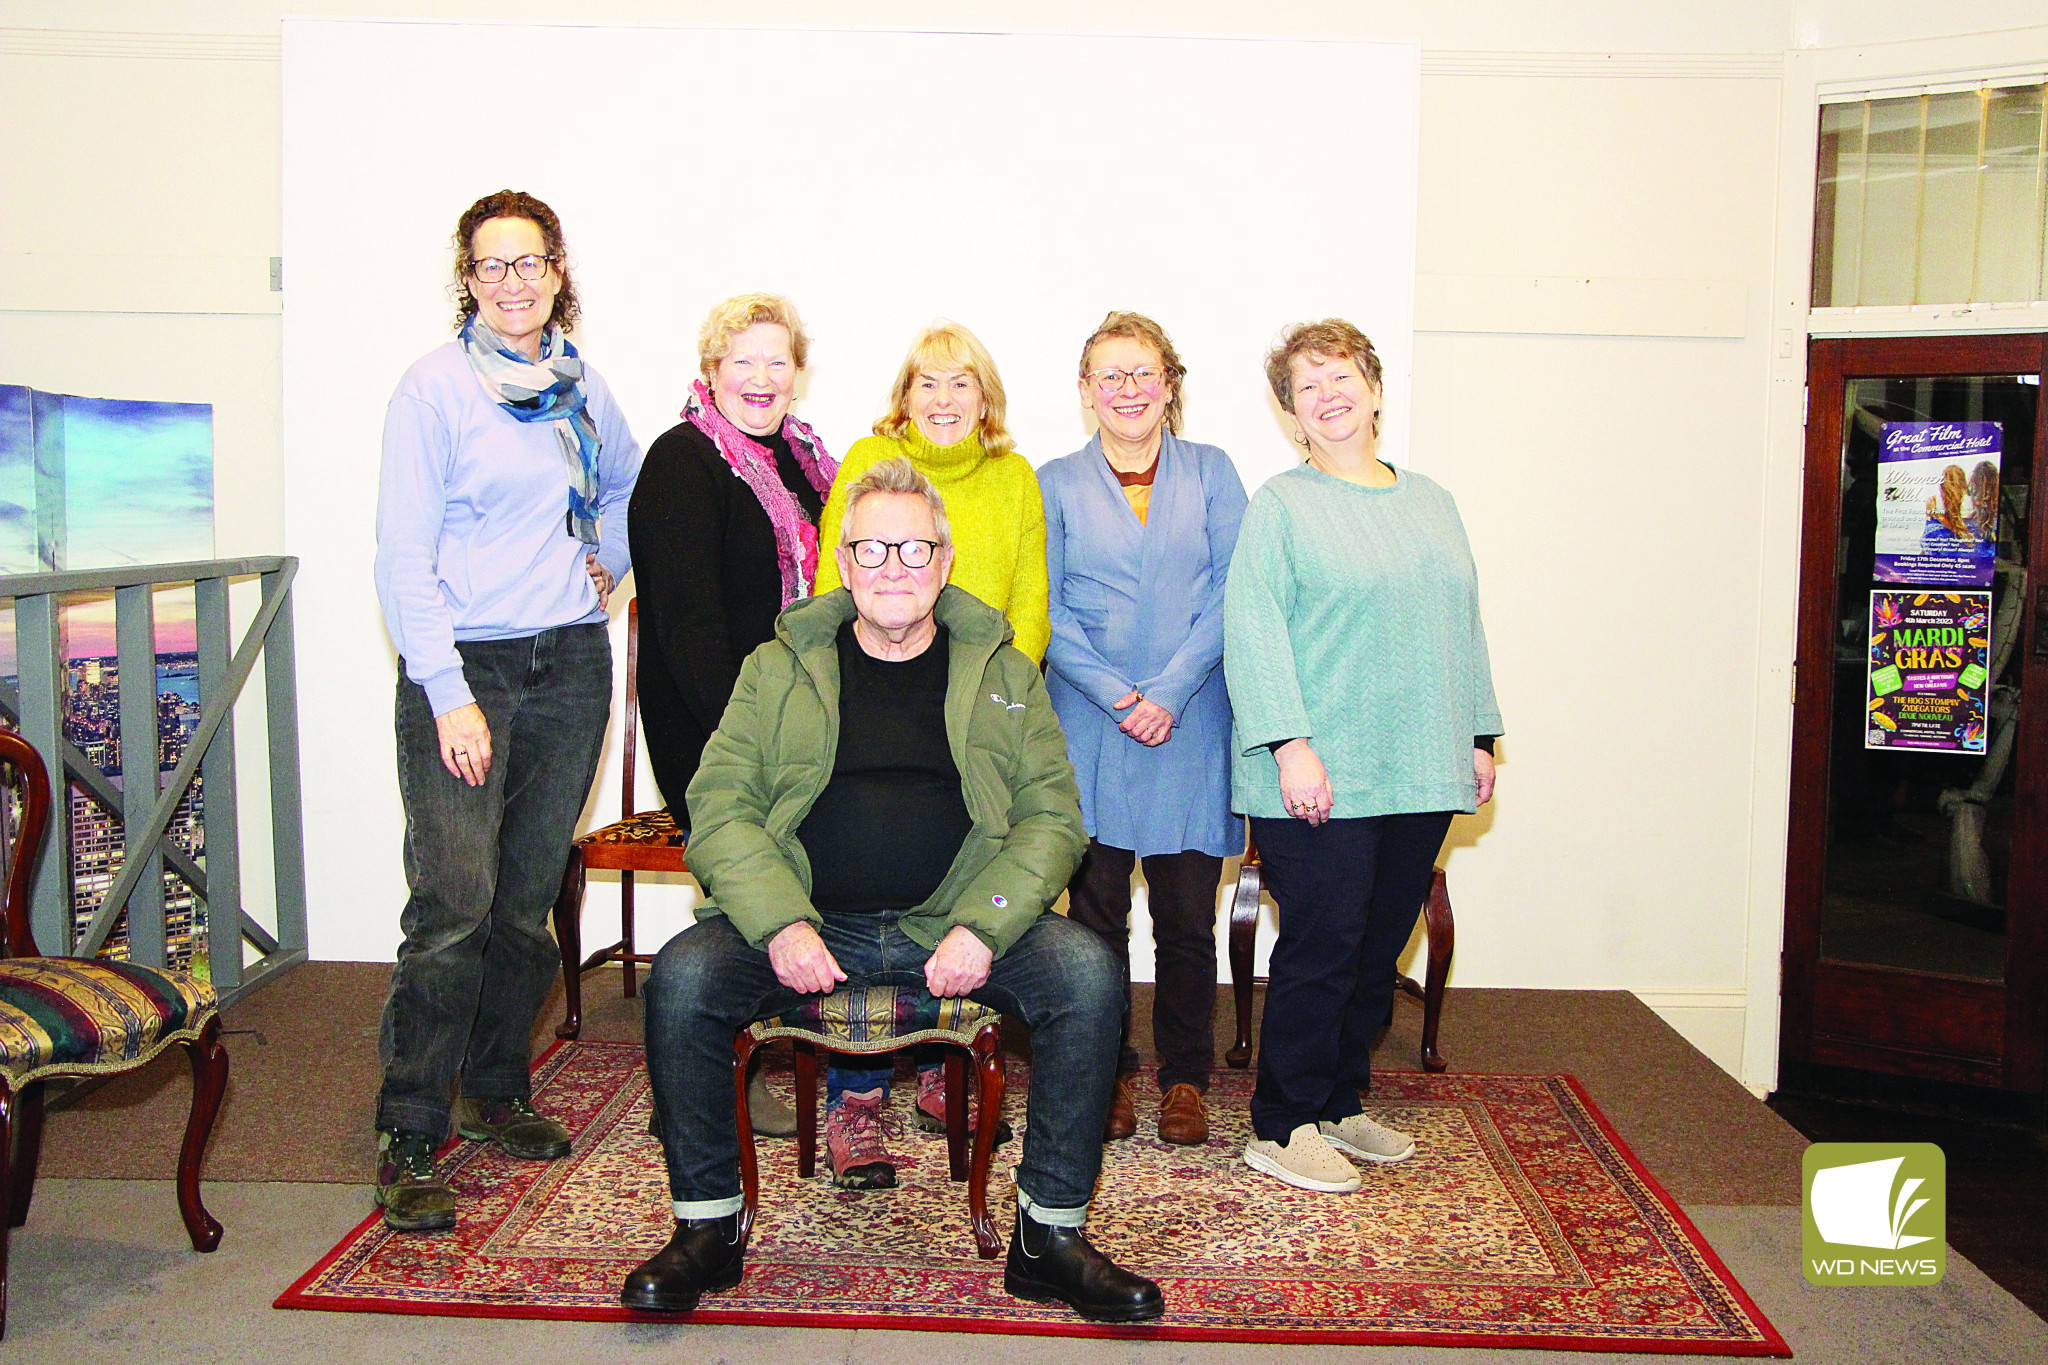 They’re back: Director Terrance O’Connell will again join forces with the Terang Theatre Troupe, bringing to life the story of one of Australia’s most high-profile mysteries. Pictured is Mr O’Connell with members of the Terang Theatre Troupe during last year’s production of Minefields and Miniskirts.